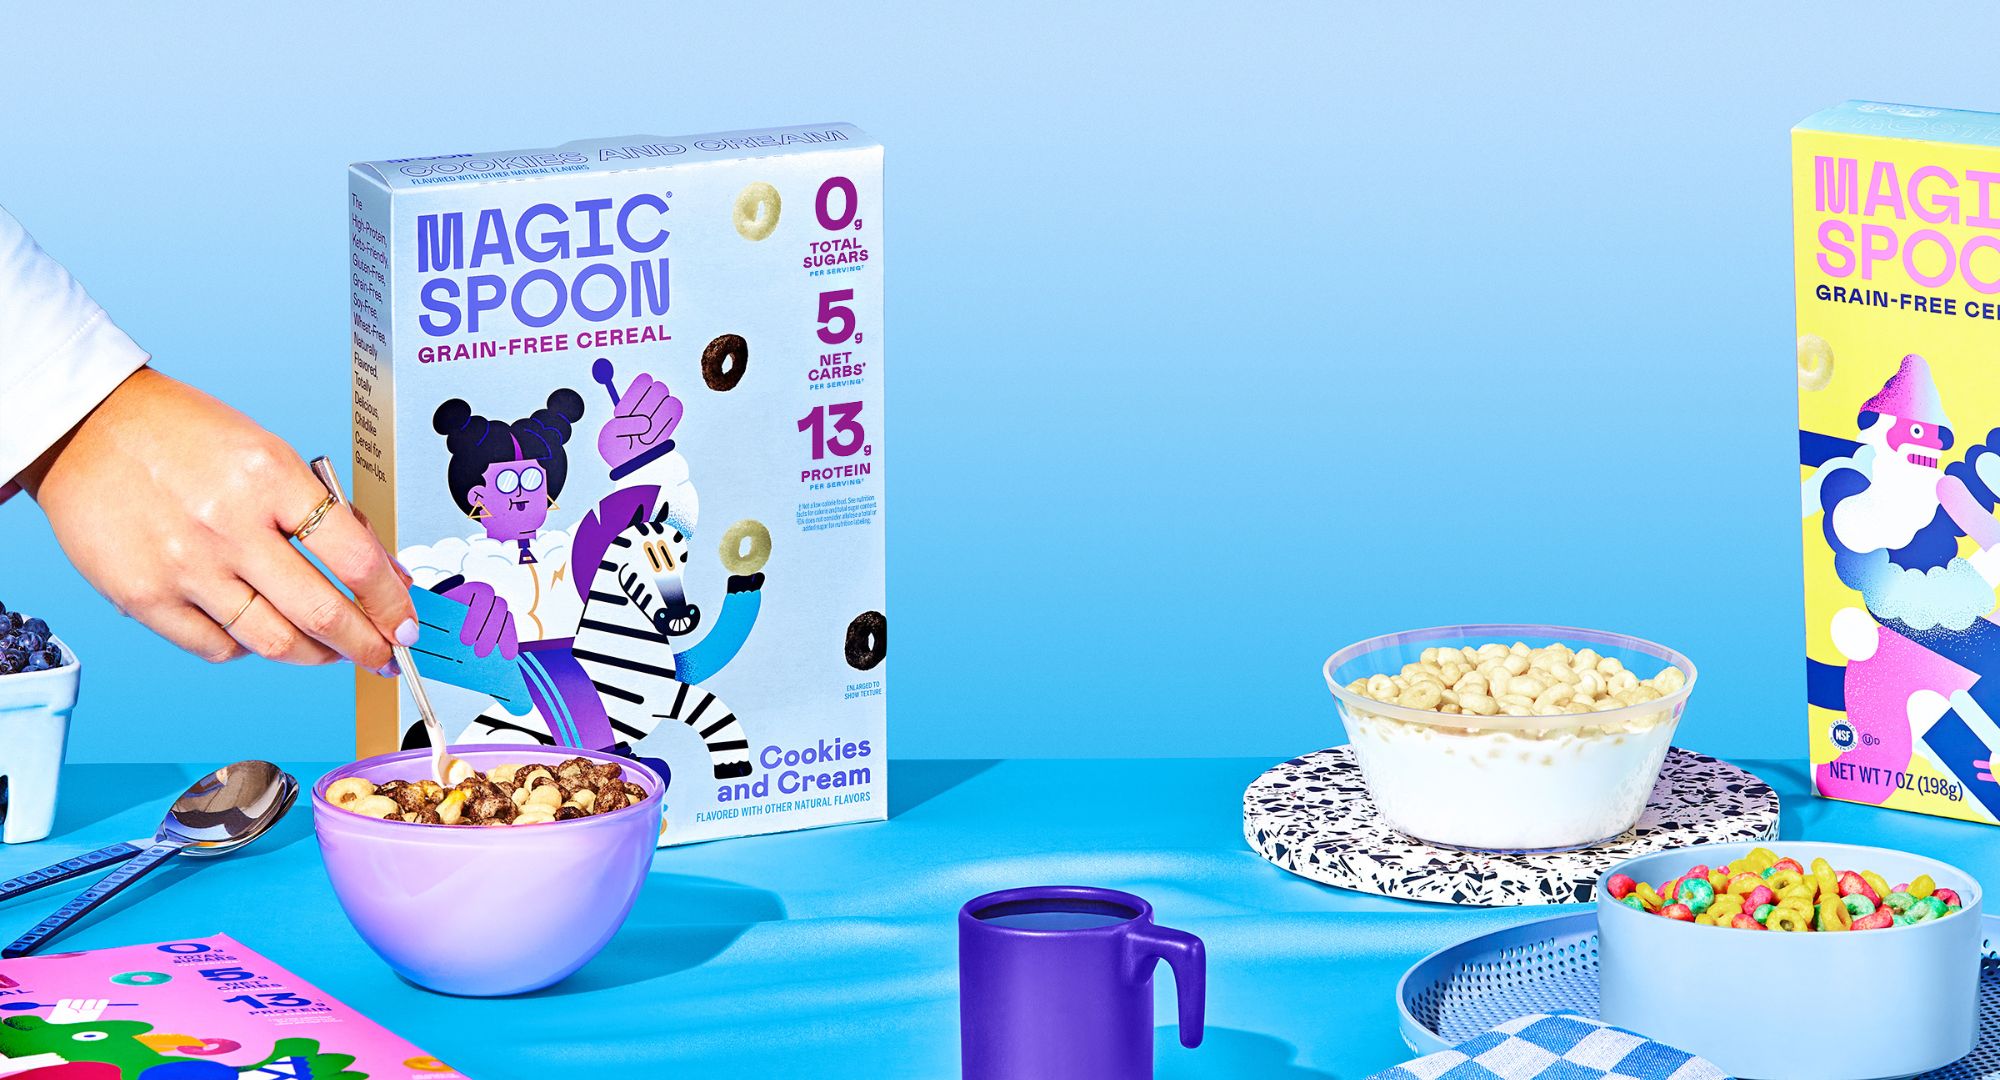 Magic Spoon cereal against a blue background